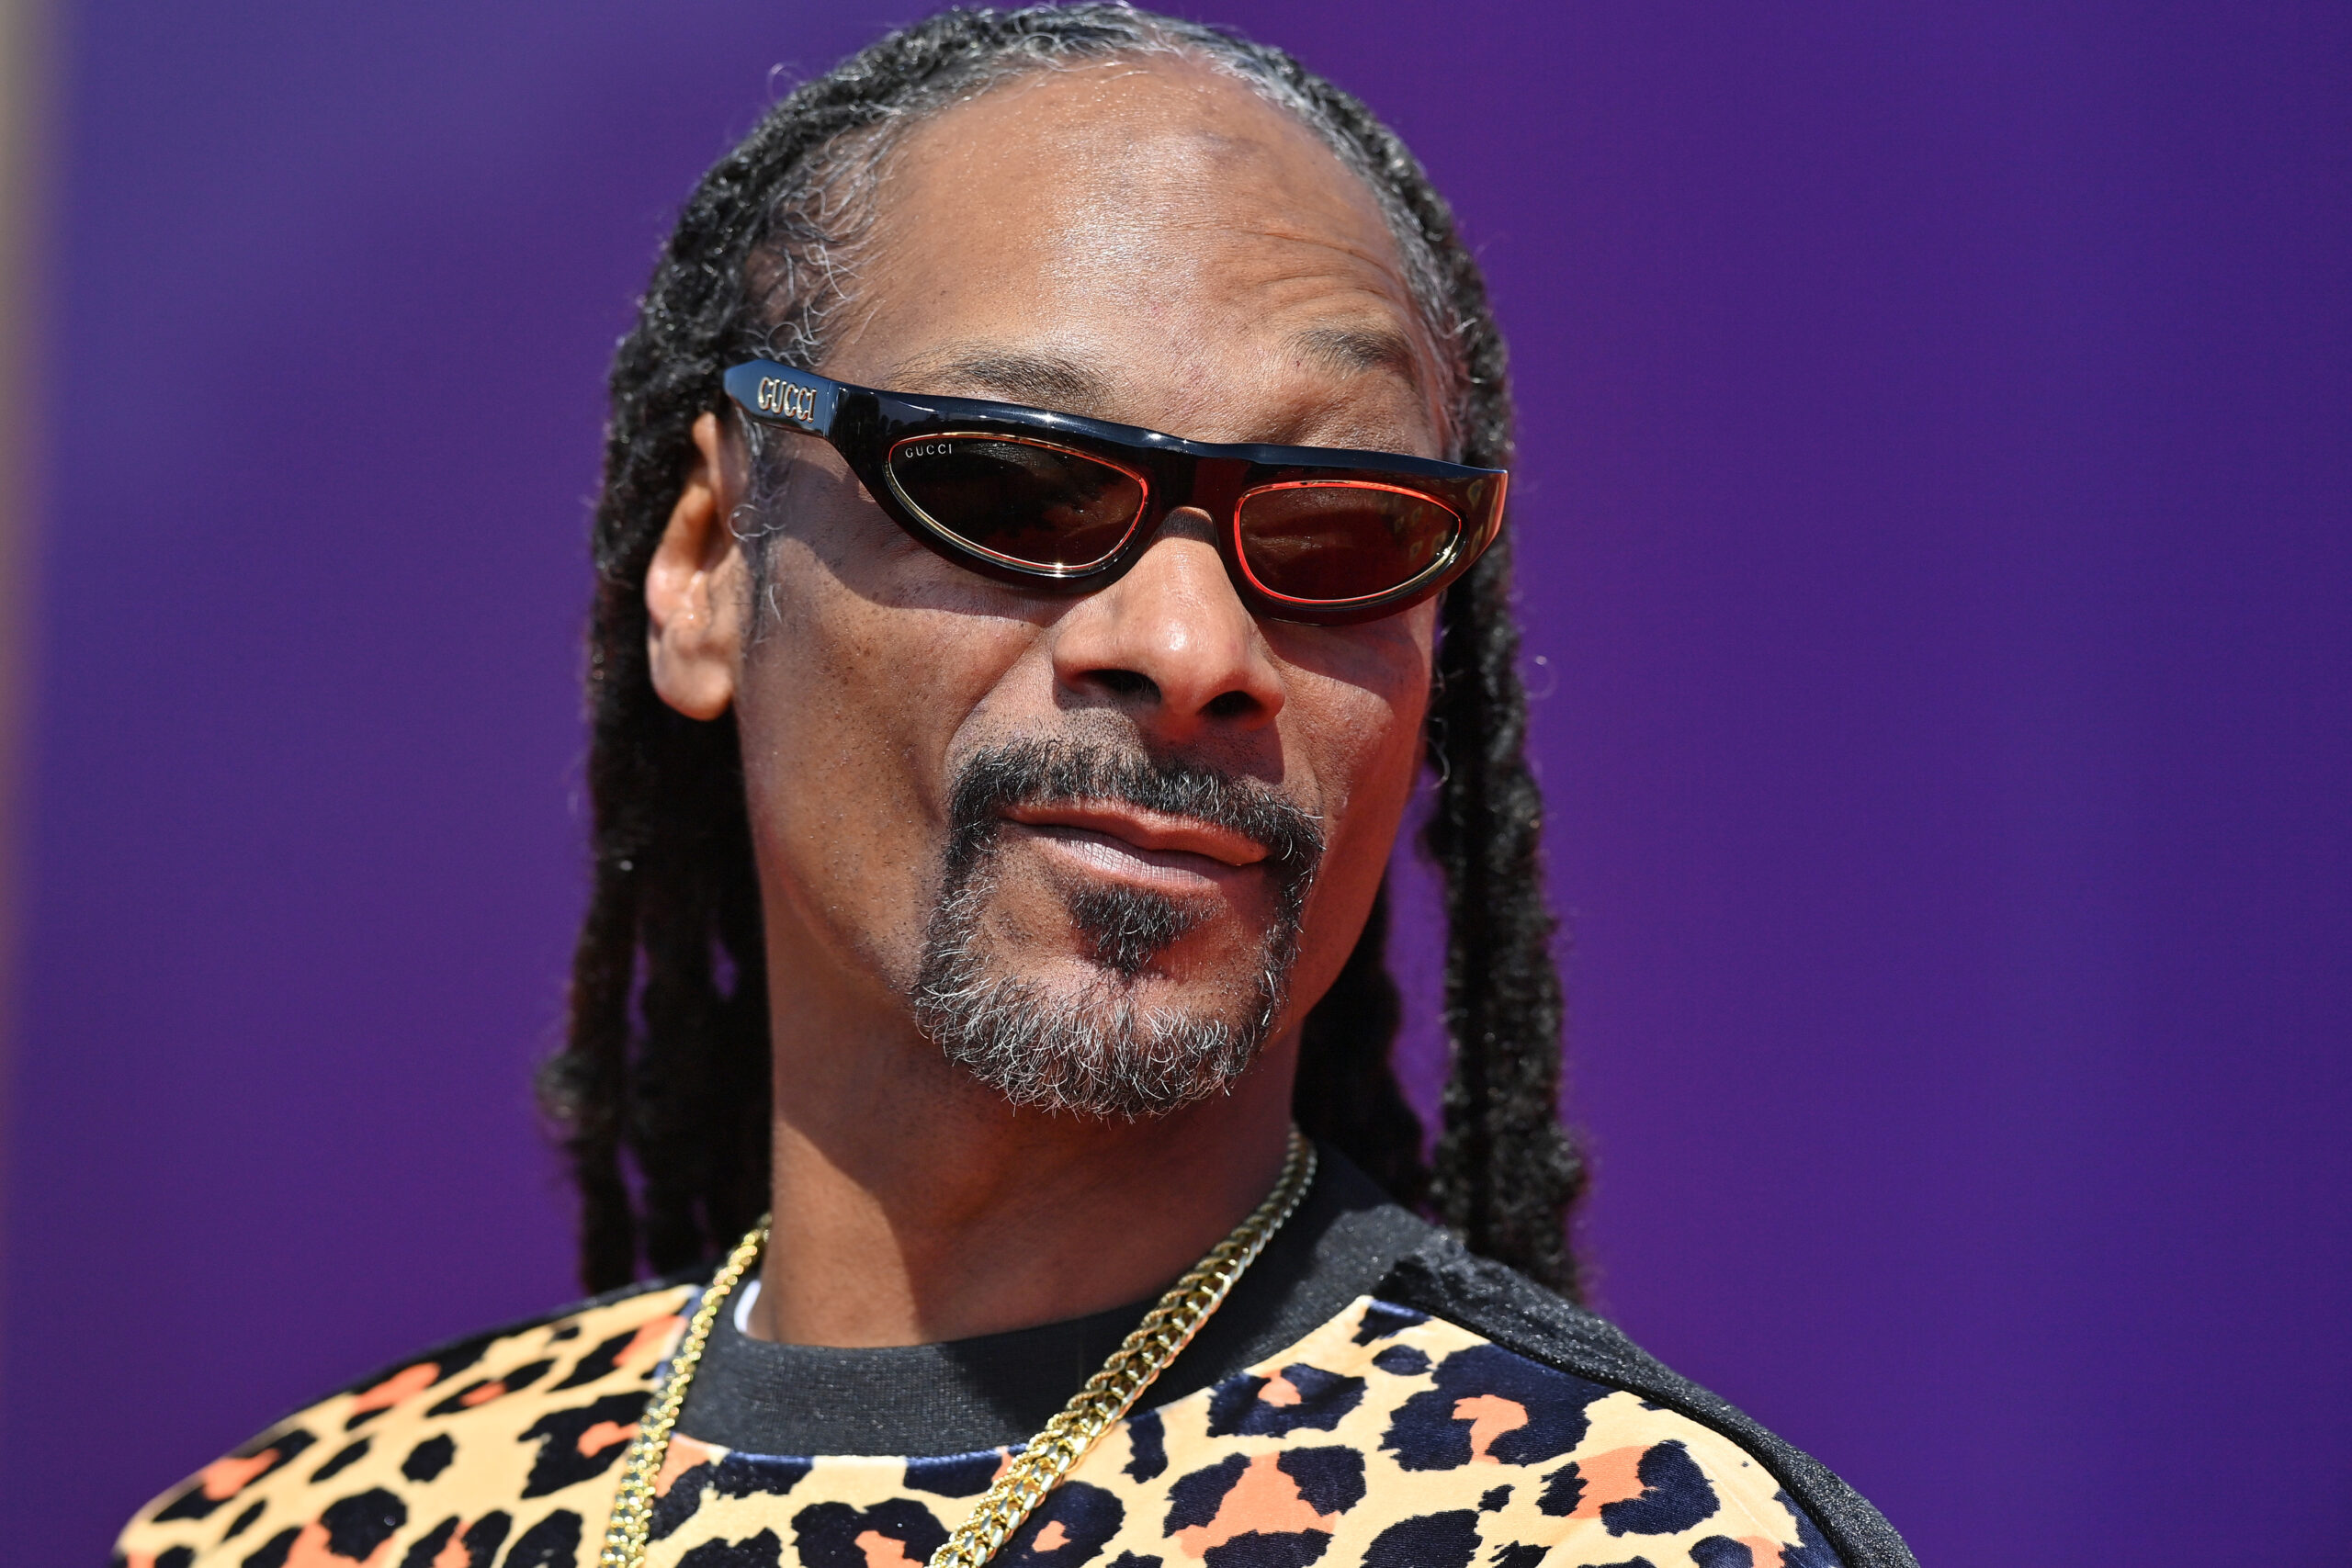 Snoop Dogg Shares Photo of ‘1st Vacation’ After 30 Years In Entertainment